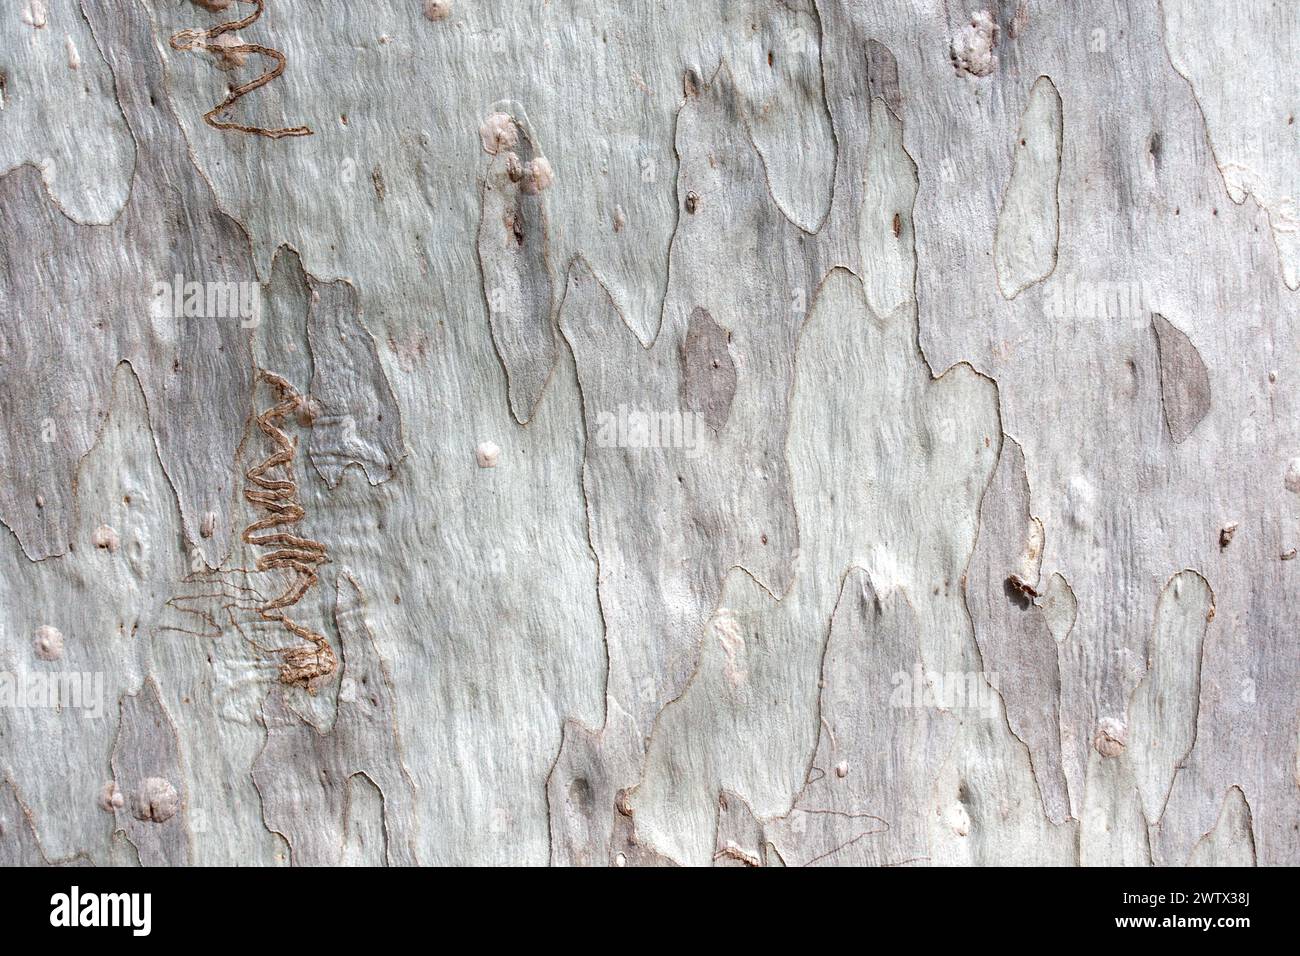 A close-up of the textured grey bark of a narrow-leaved scribbly gum Eucalyptus tree (Eucalyptus racemosa) in Queensland, Australia Stock Photo